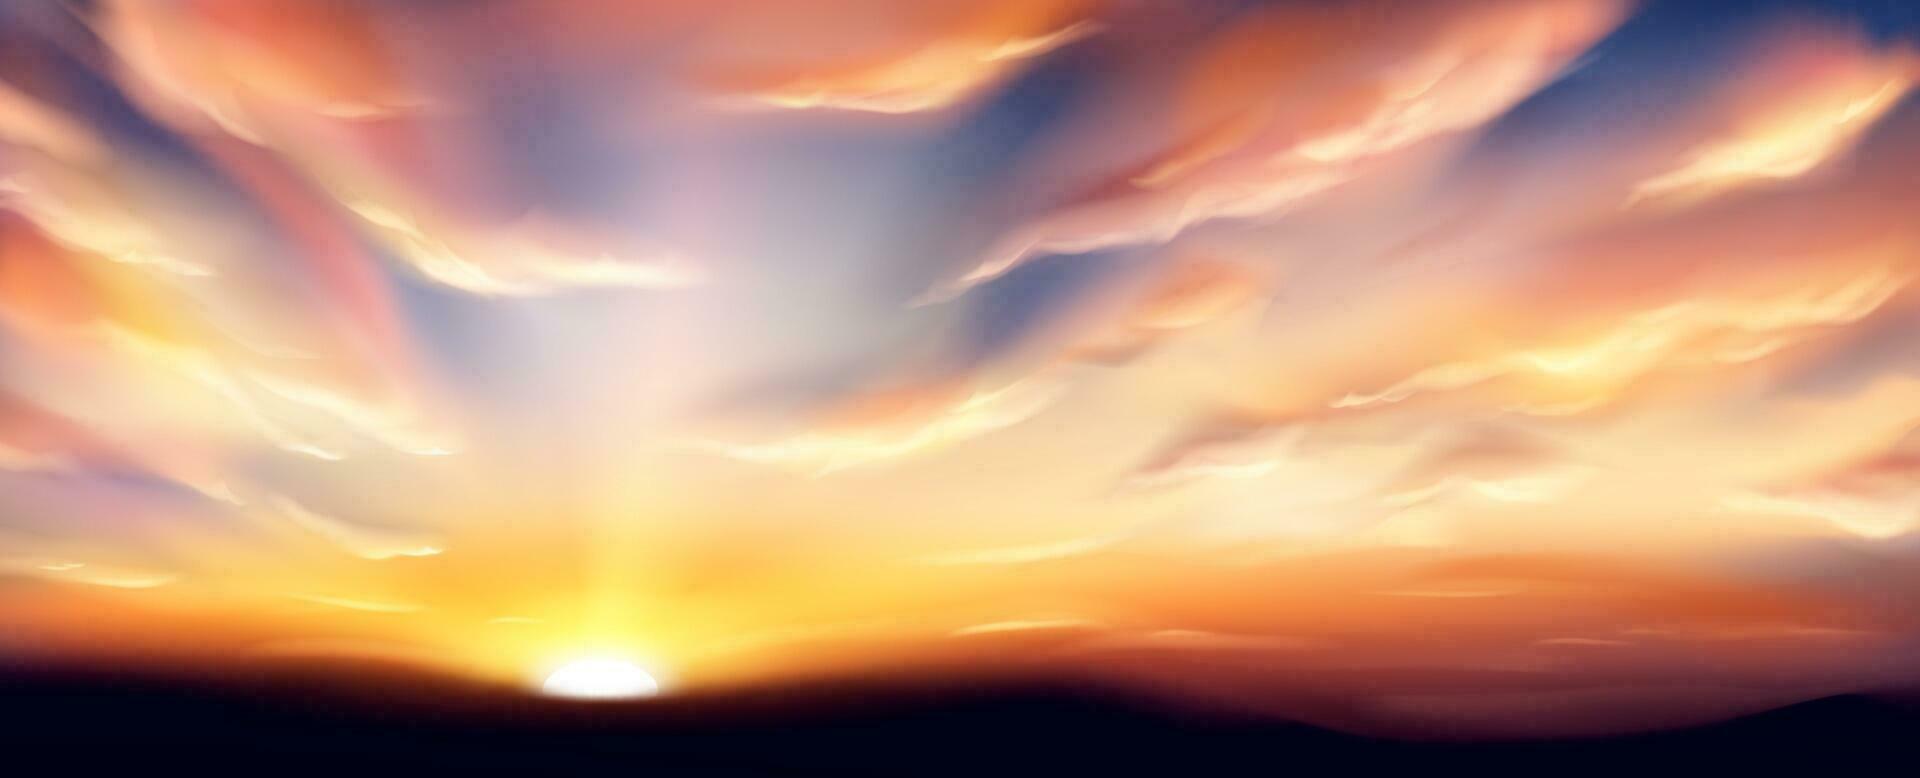 Realistic sunset sky with clouds vector